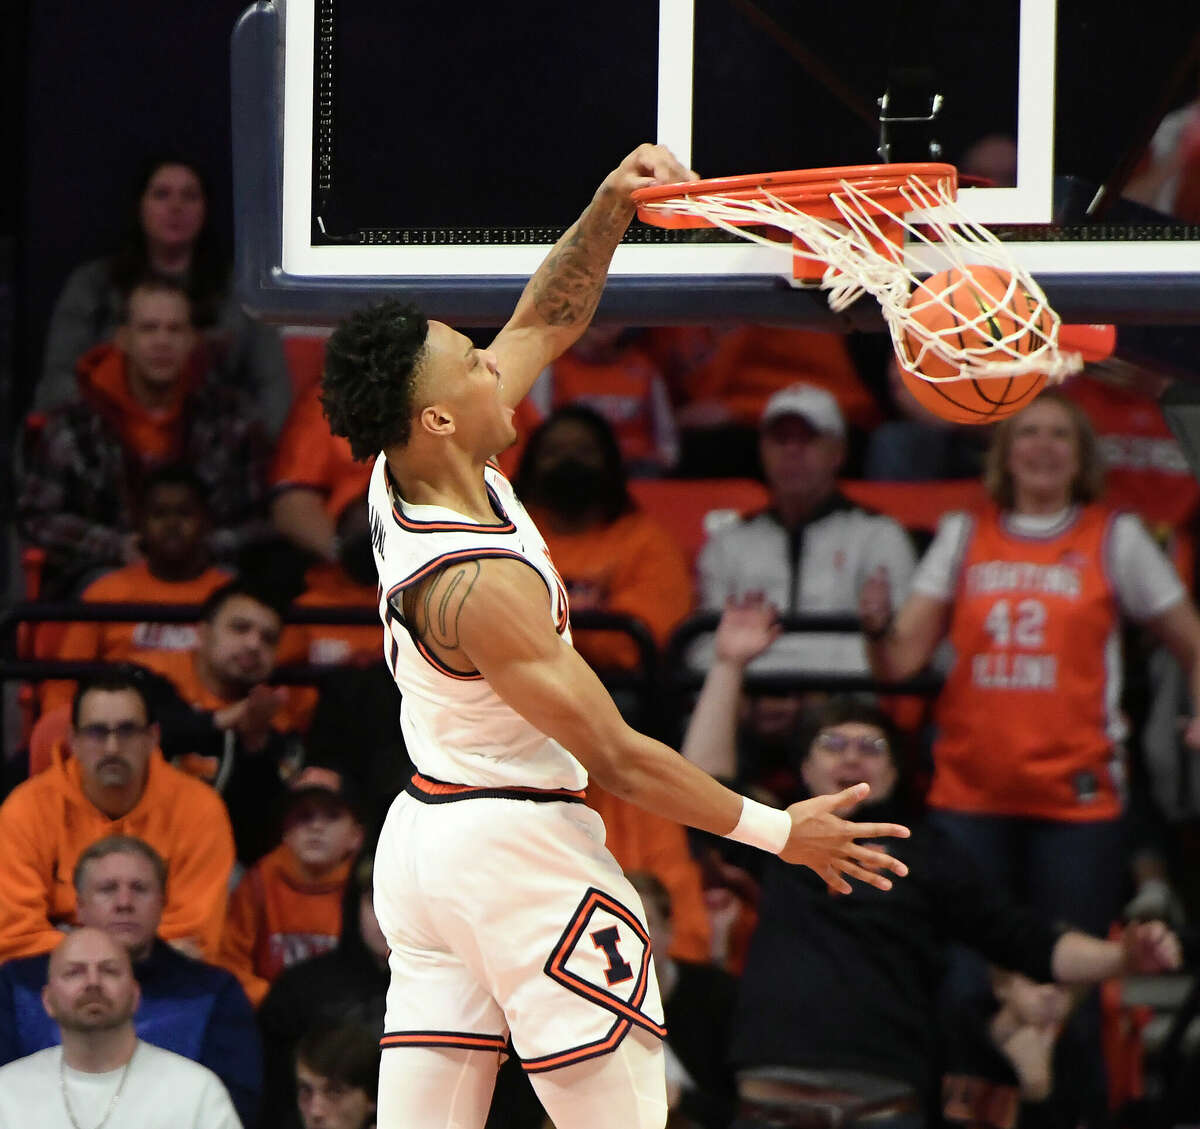 Illinois' Terrence Shannon Jr. dunks during the second half game against Wisconsin on Saturday in Champaign.  